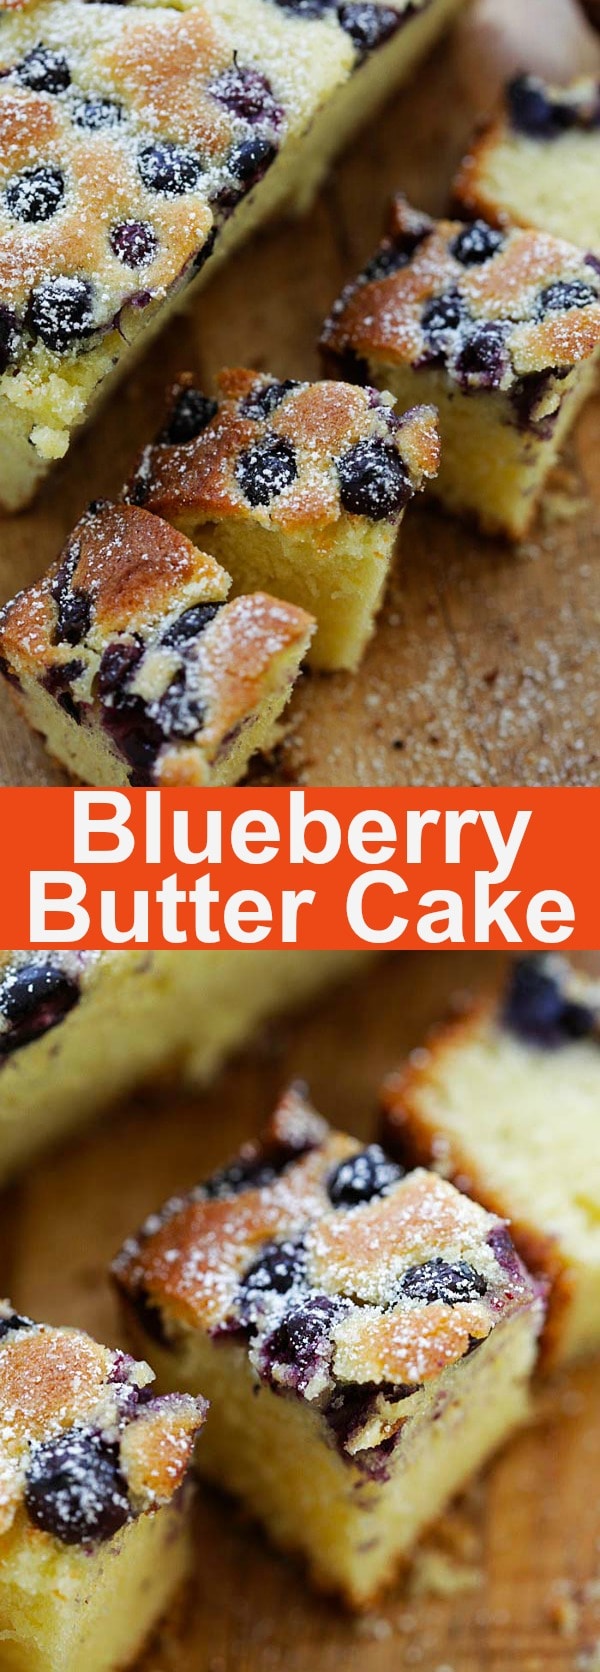 Blueberry Butter Cake - the best butter cake ever, topped with fresh blueberries. This  cake is dense, sweet and buttery | rasamalaysia.com